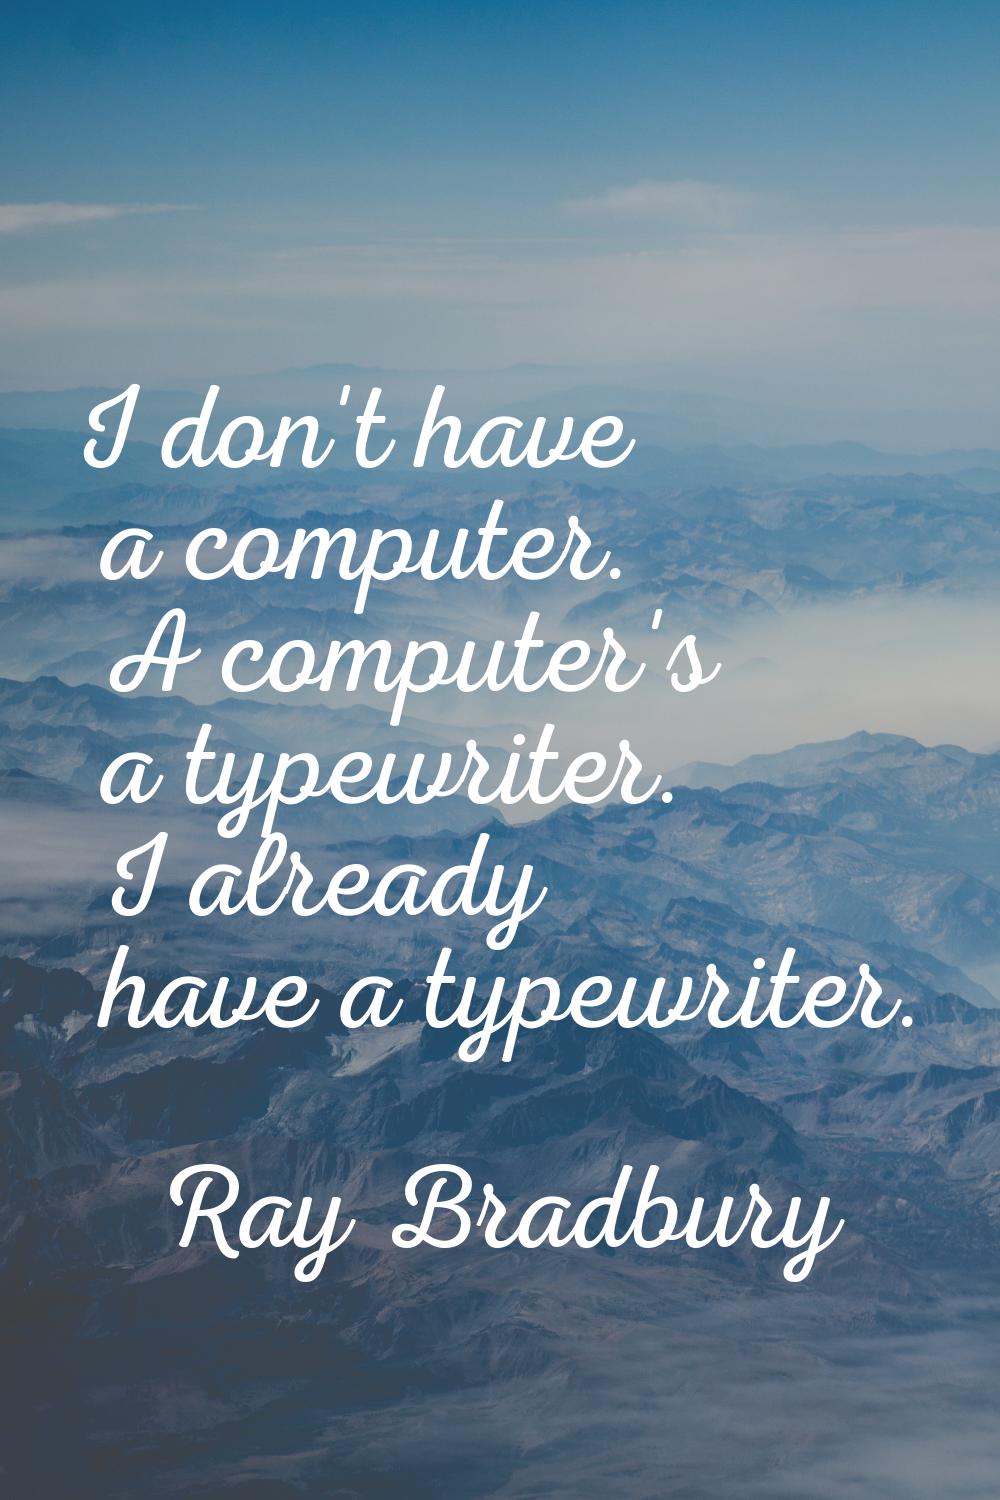 I don't have a computer. A computer's a typewriter. I already have a typewriter.